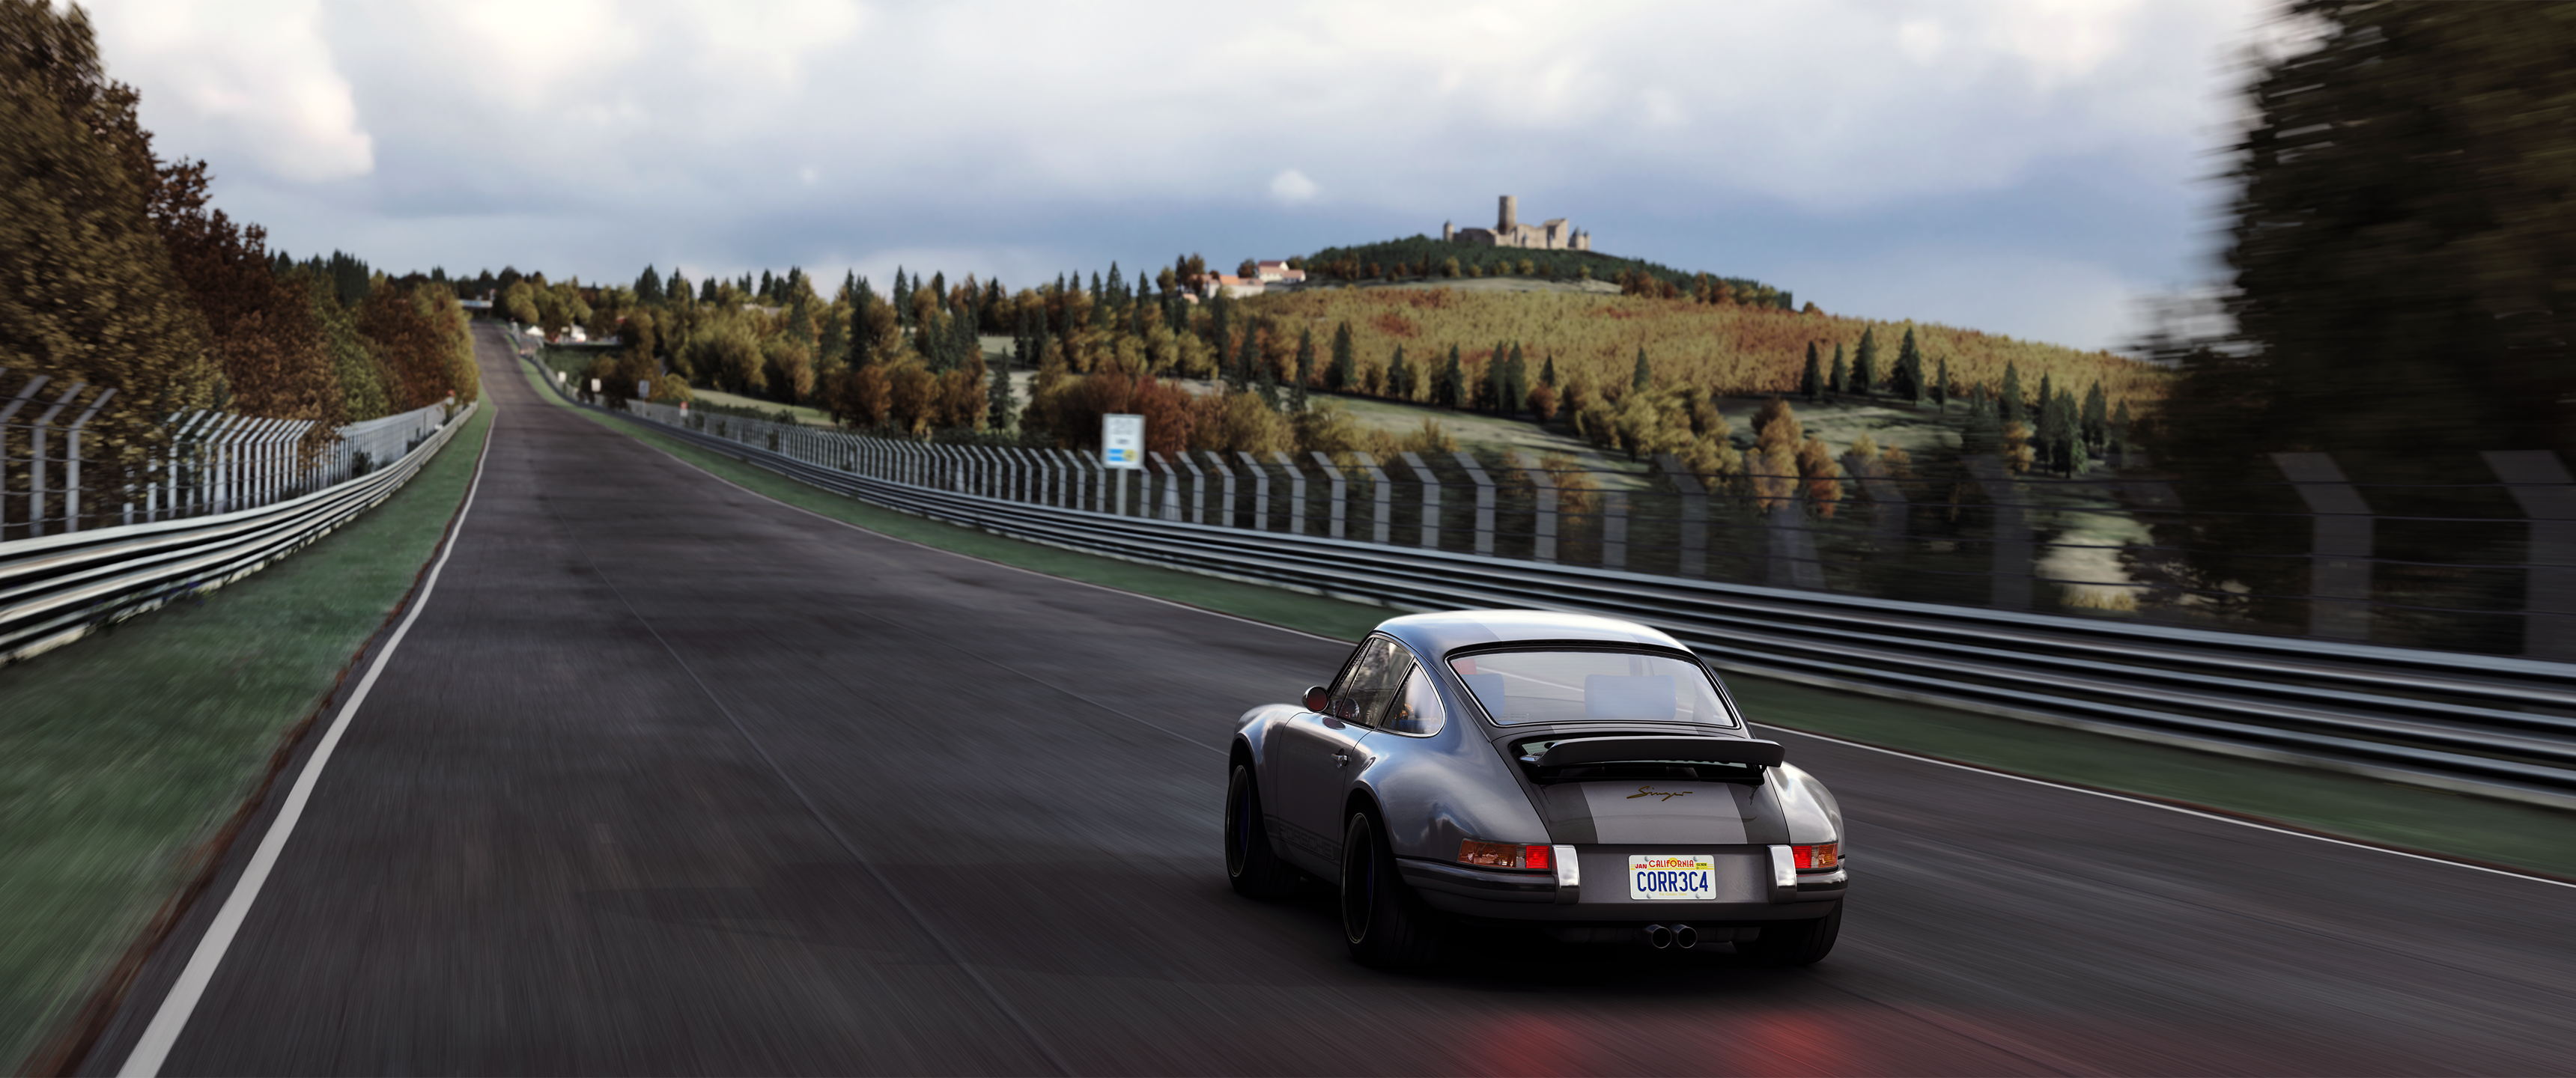 Nurburgring Porsche 911 Singer Assetto Corsa Car Video Games Licence Plates Road Taillights 3440x1440